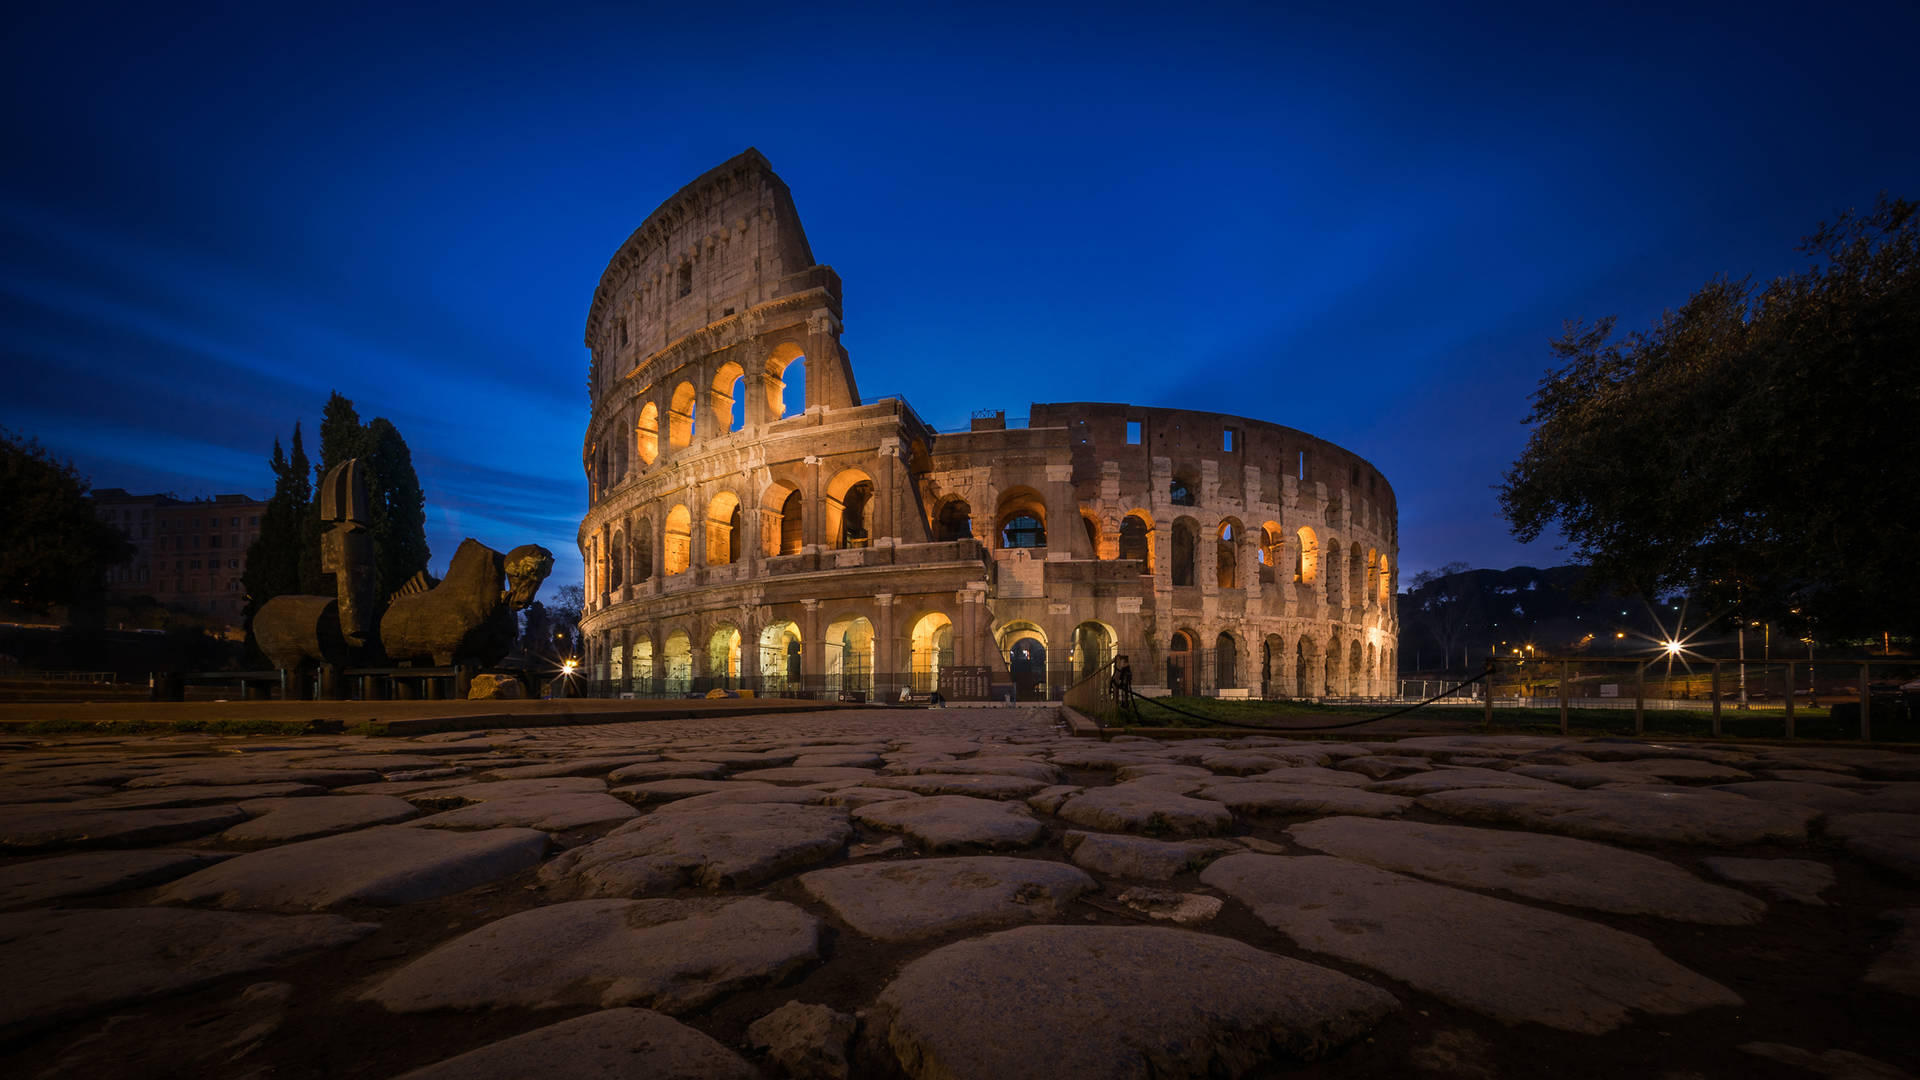 Colosseum In Rome Beneath The Cloudy Night Sky Wallpaper